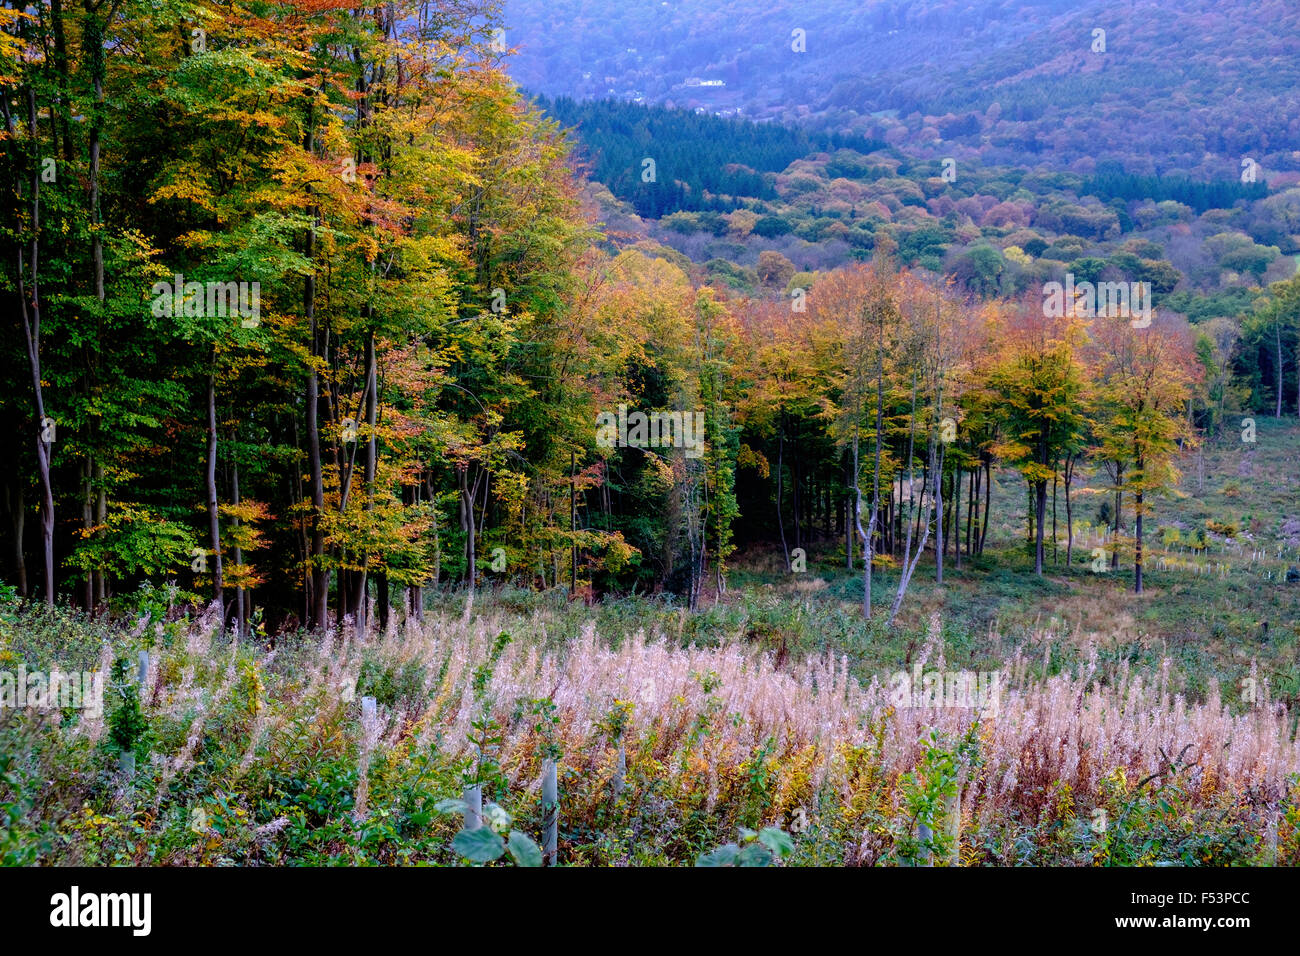 Autumn trees and woodland in landscape in Wye Valley with hills in background Stock Photo